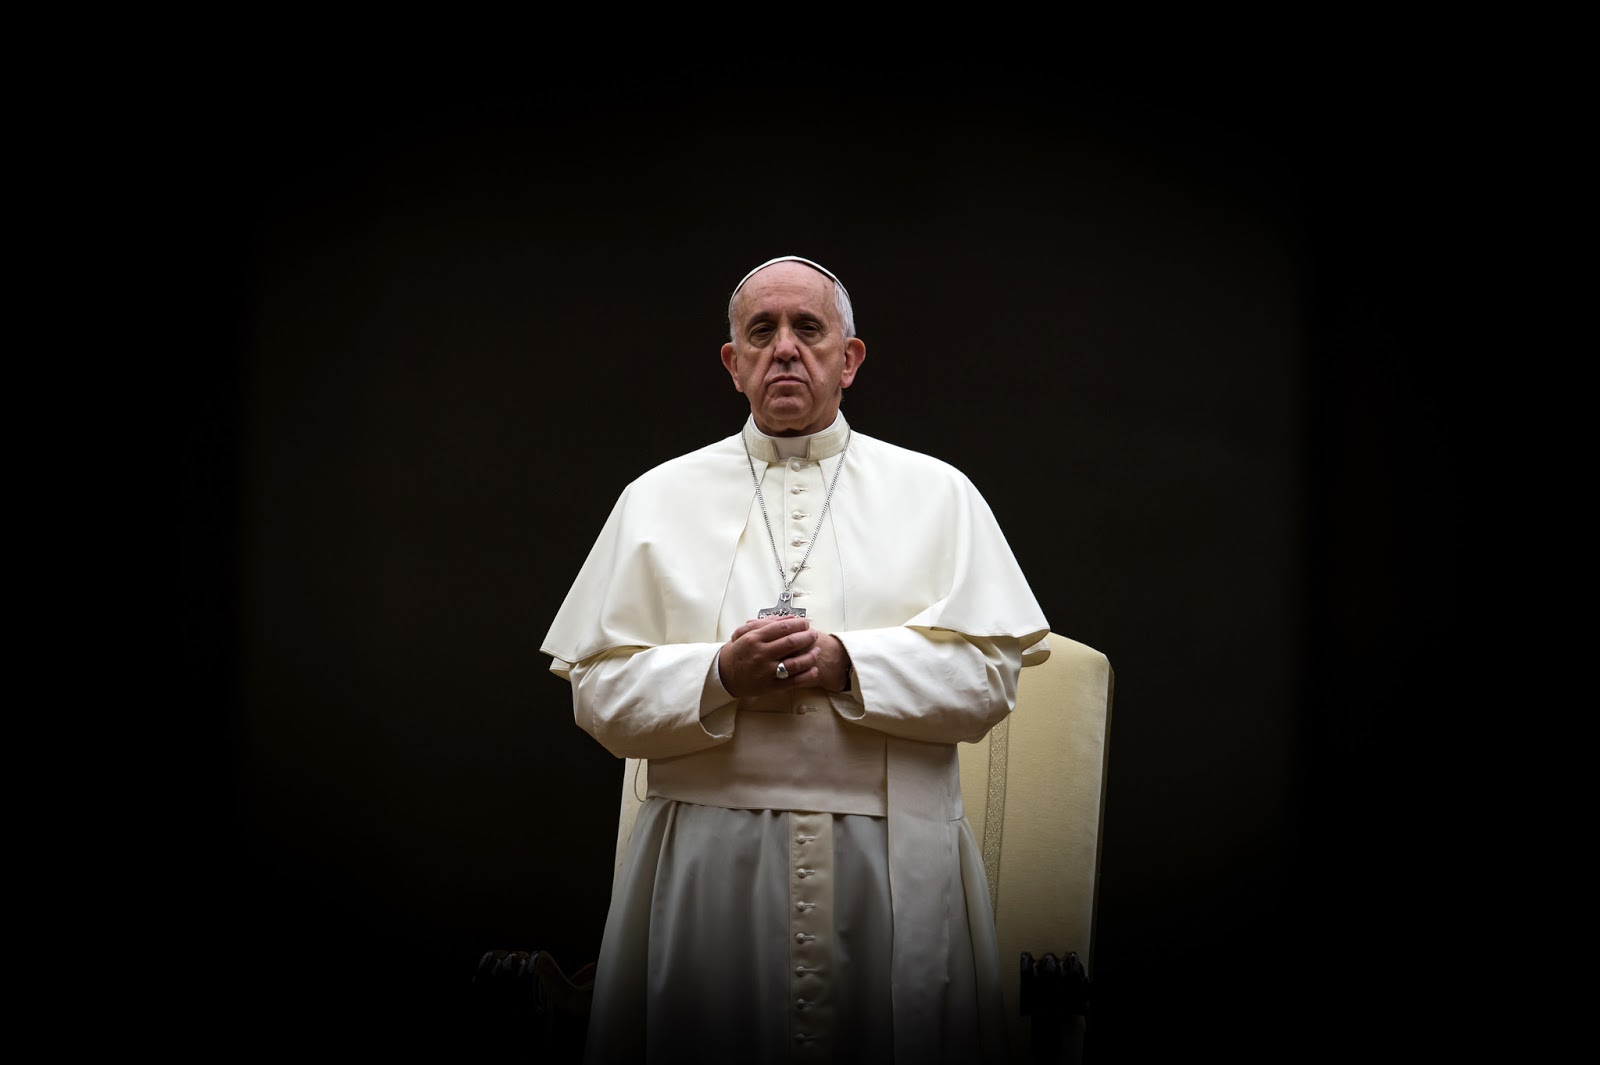 a-catholic-life-francis-the-lord-s-prayer-induces-temptation